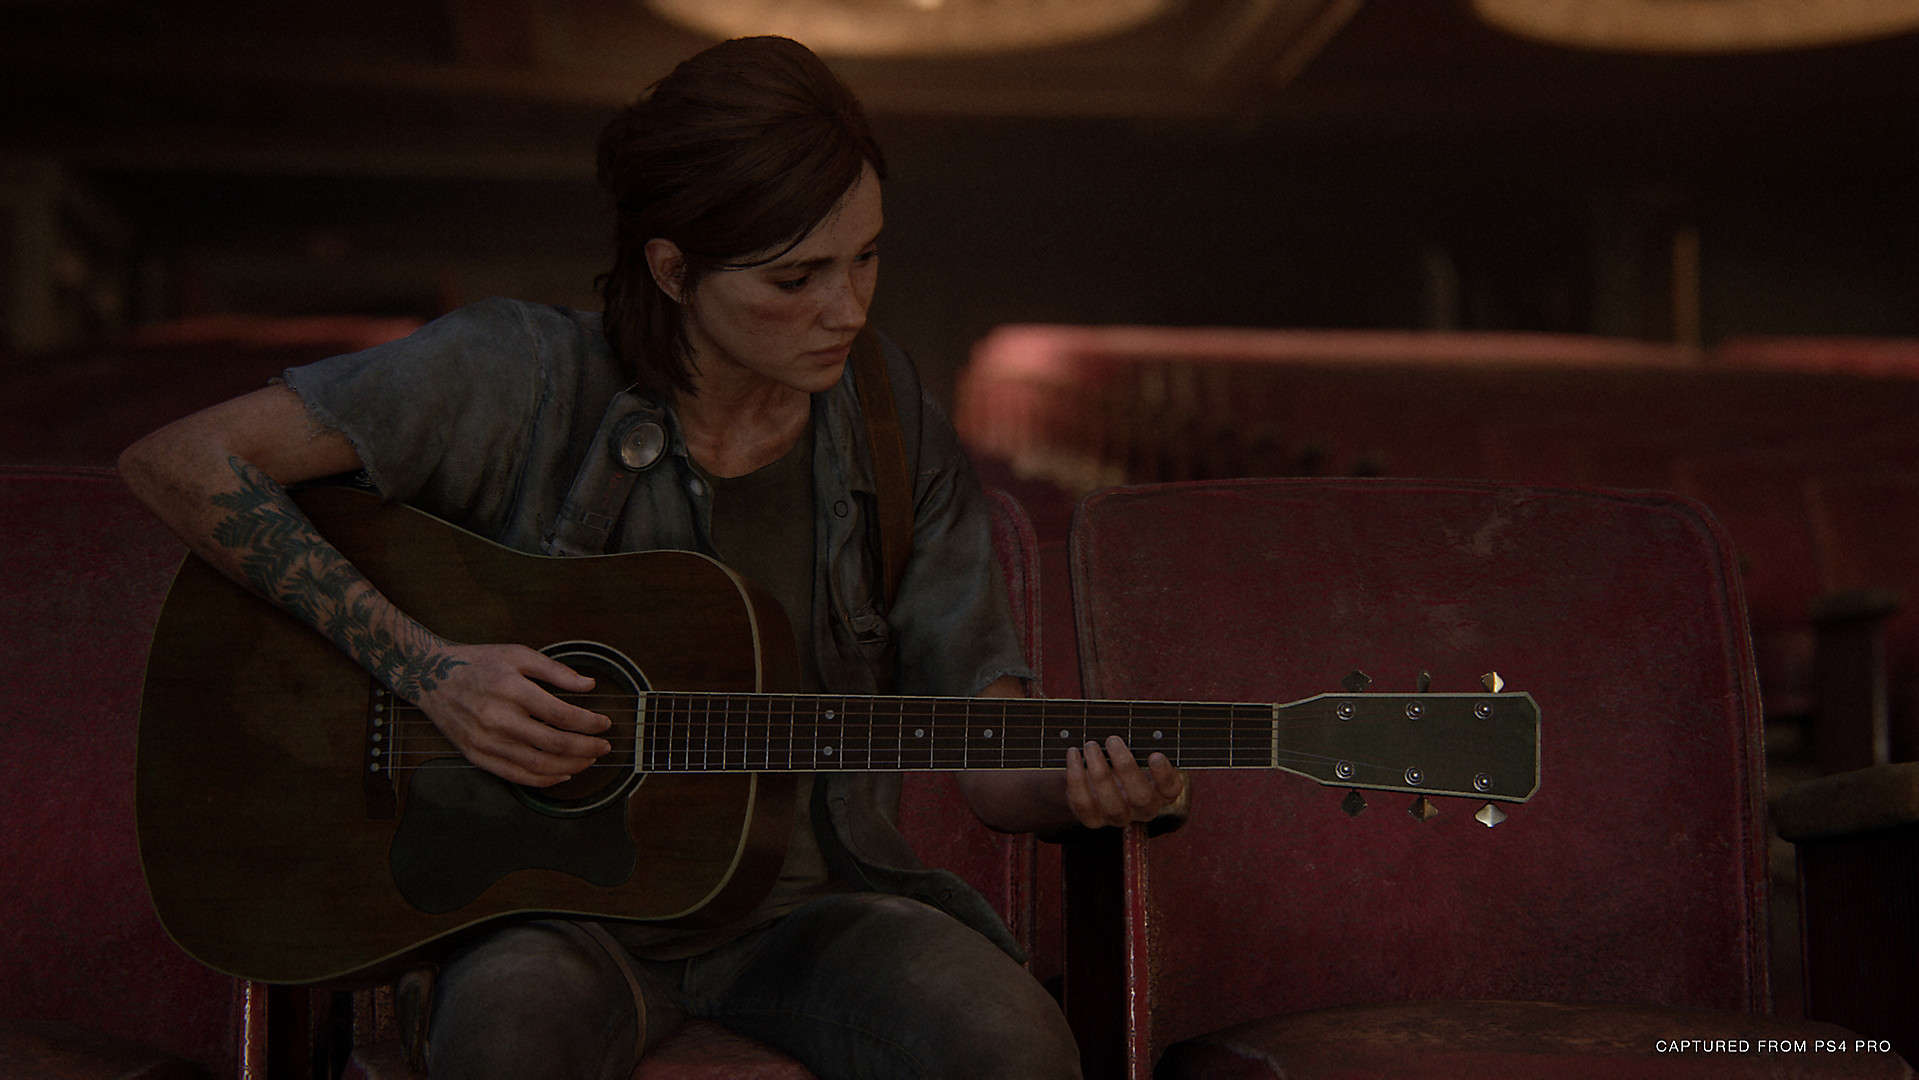 HAS JOEL DIED? DINA APPEARED FOR THE FIRST TIME! The Last of Us